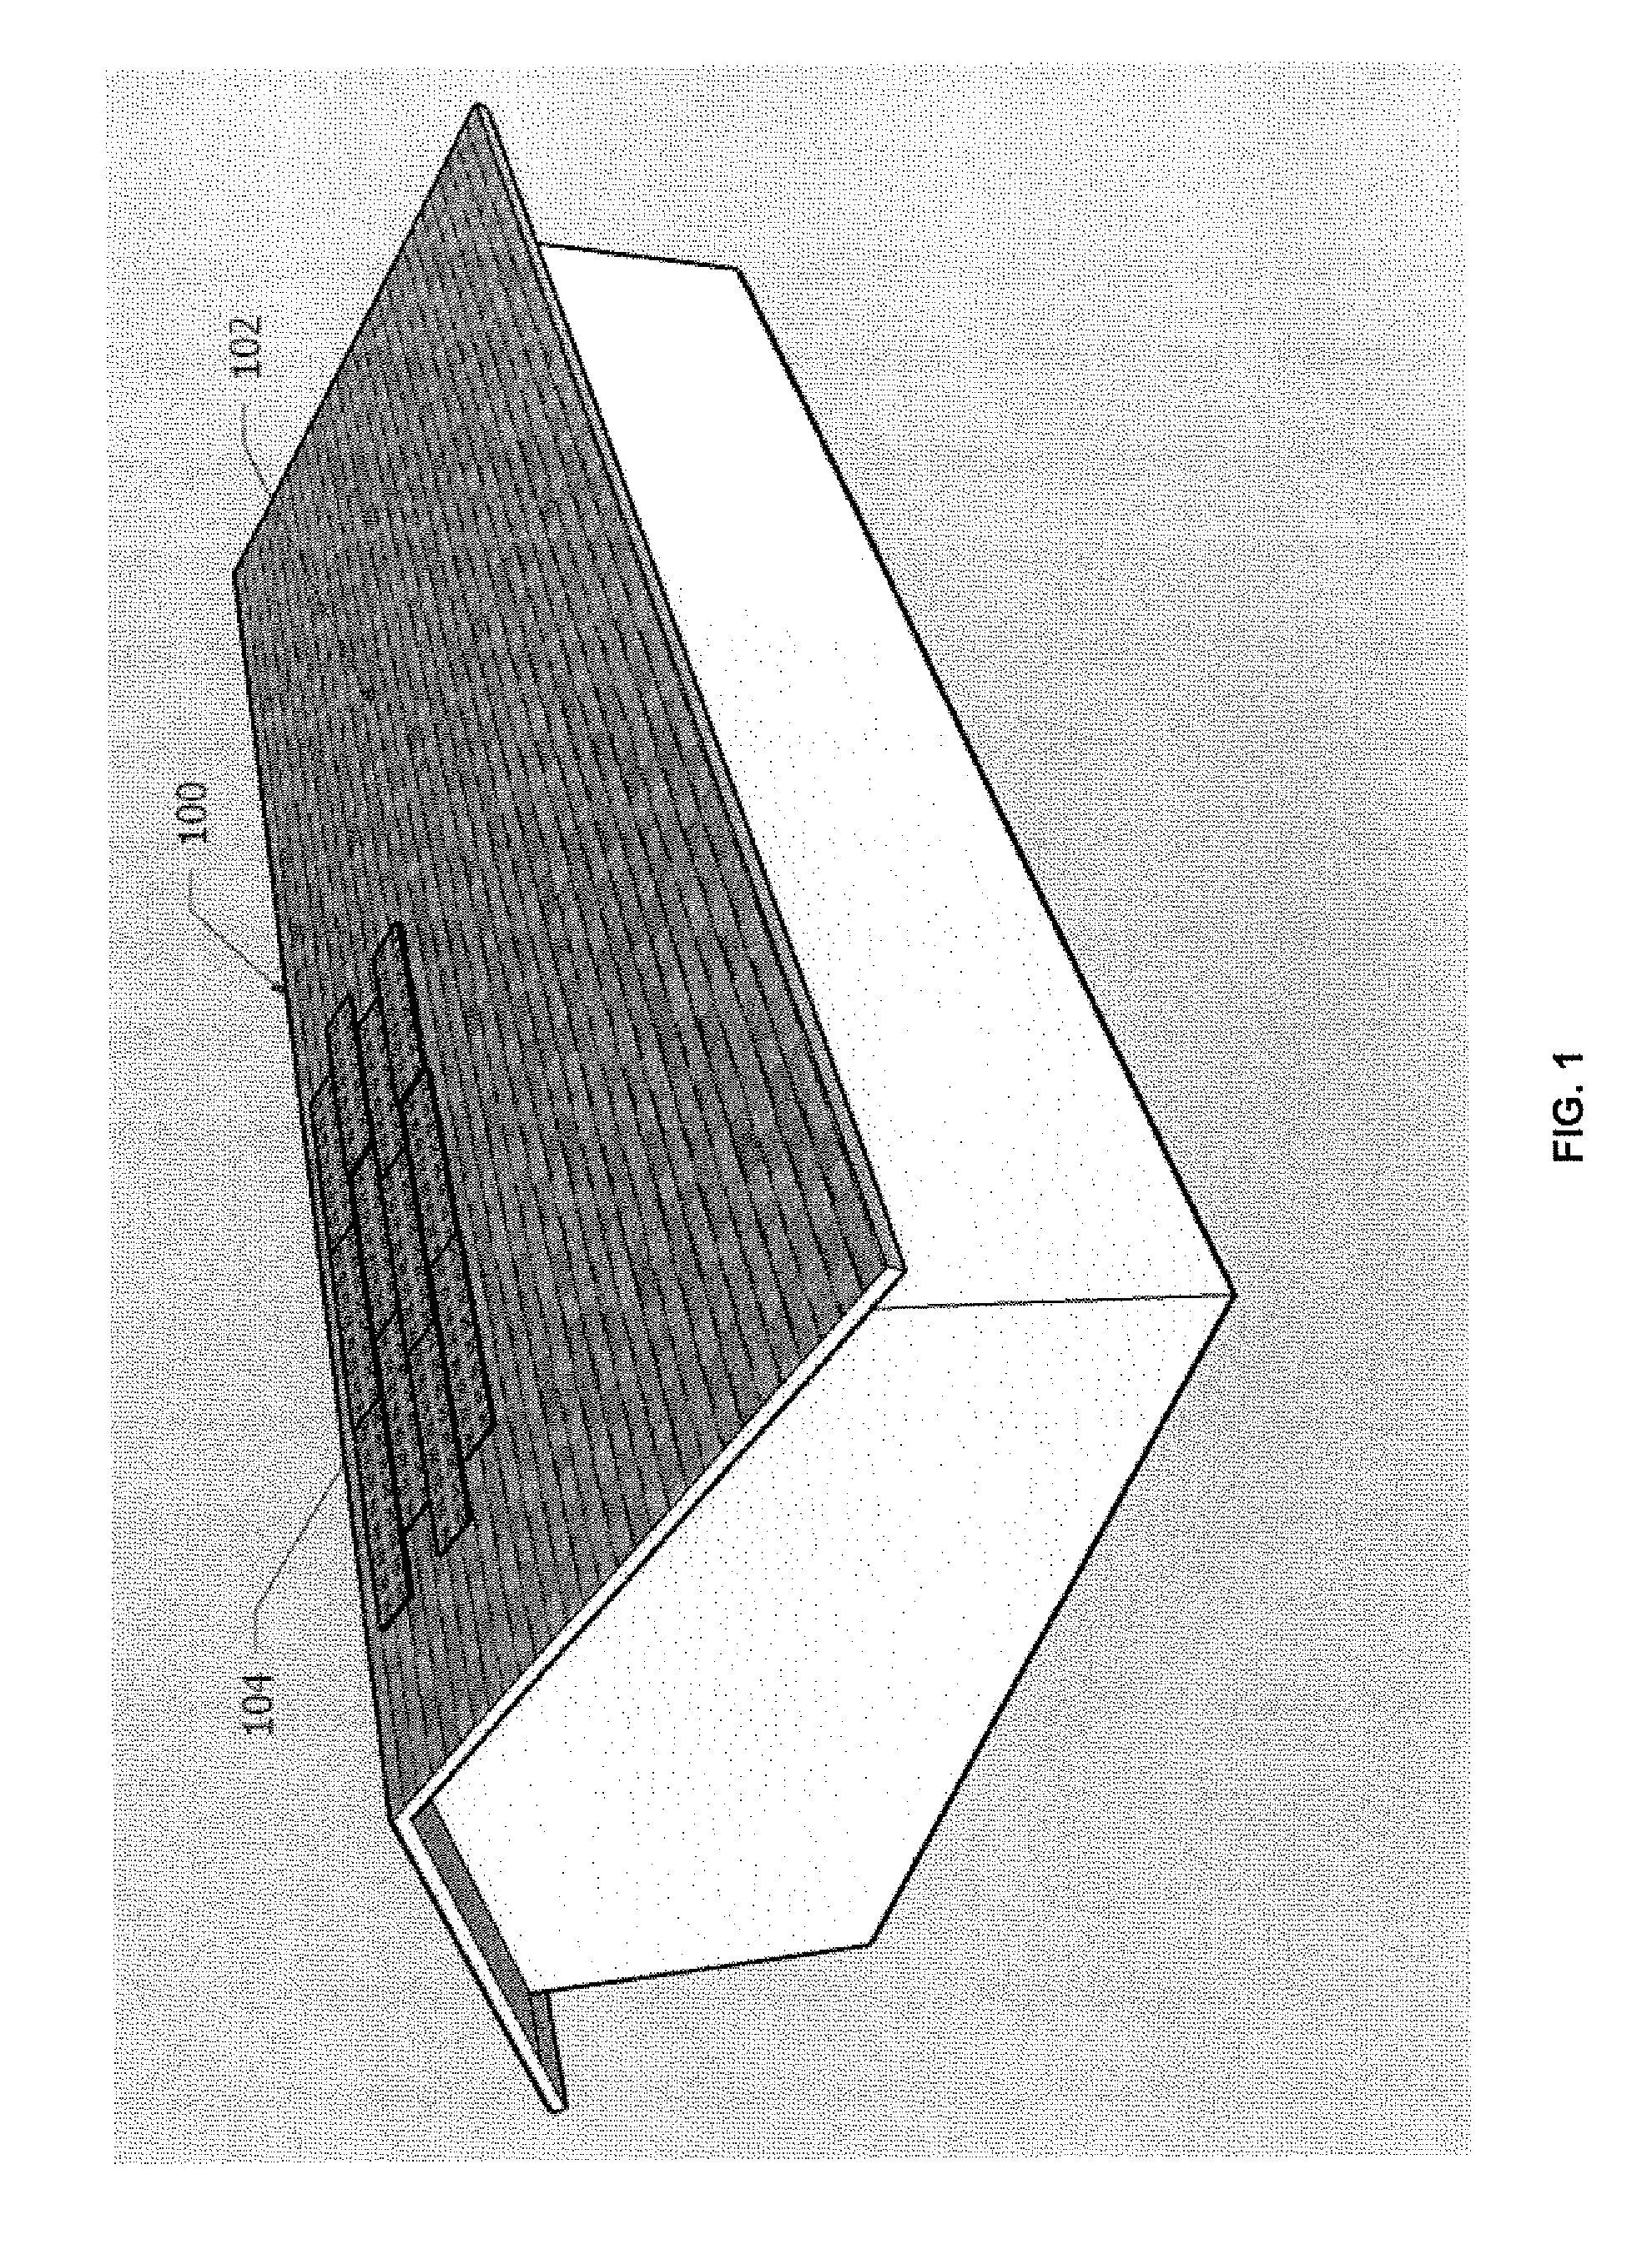 Solar panels systems and methods